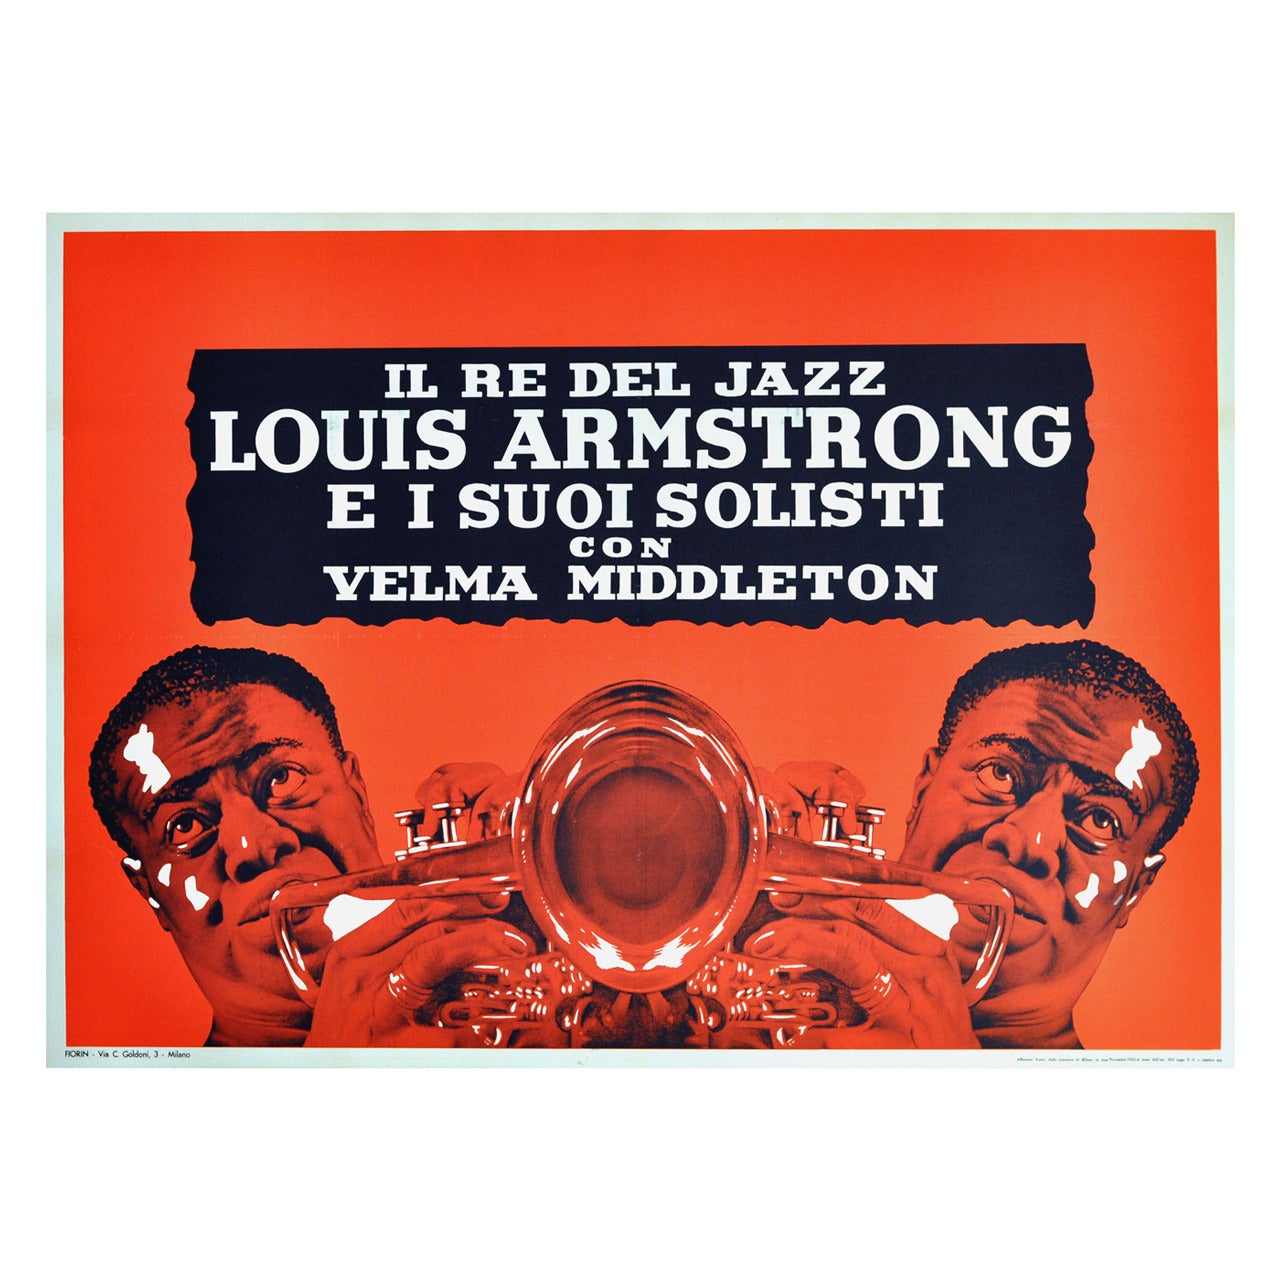 Very Rare Original Vintage Advertising Poster for a Louis Armstrong and Velma Middleton Jazz Concert in Milan